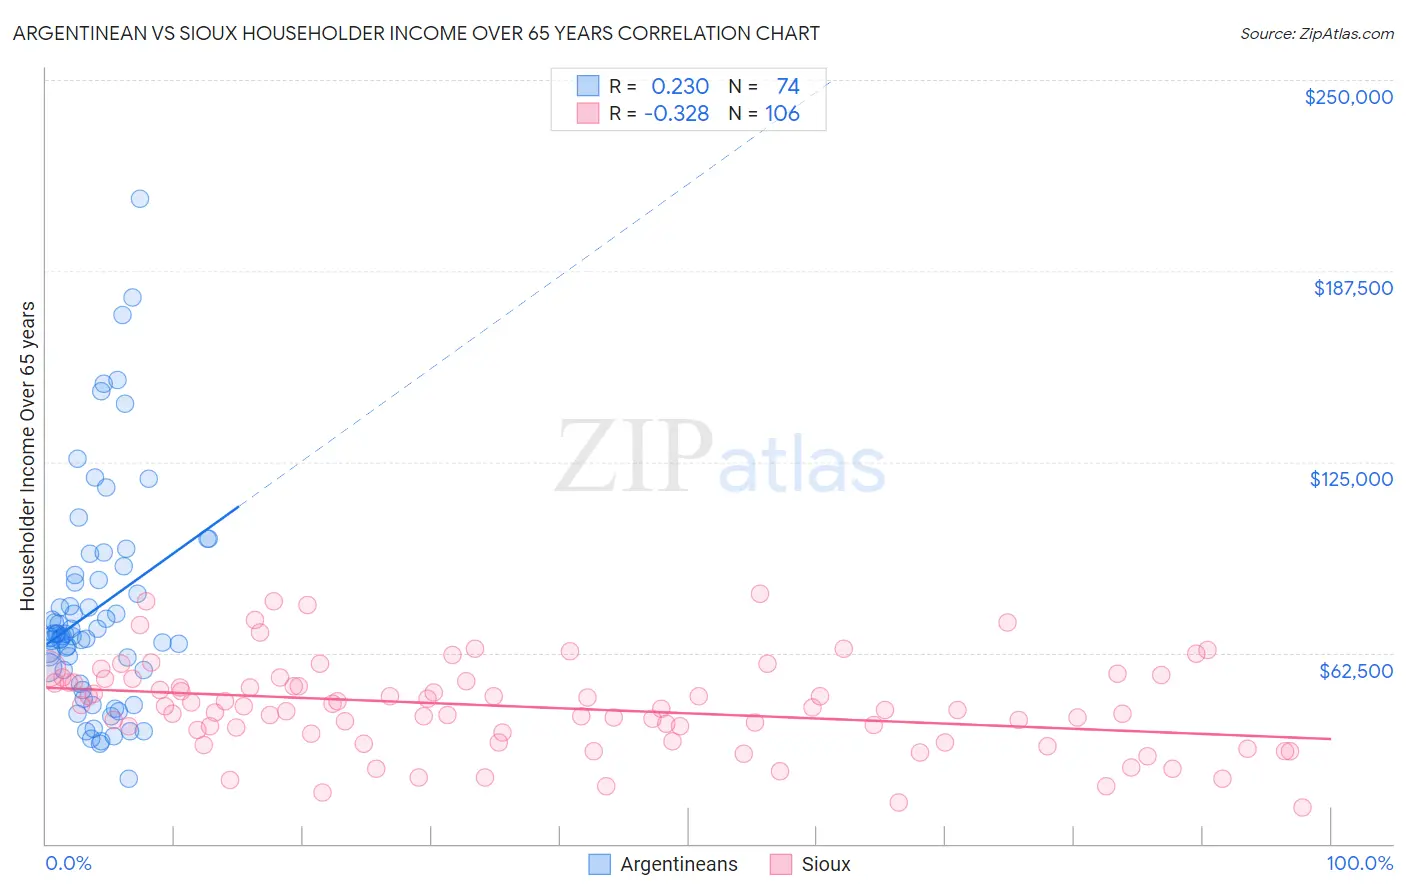 Argentinean vs Sioux Householder Income Over 65 years